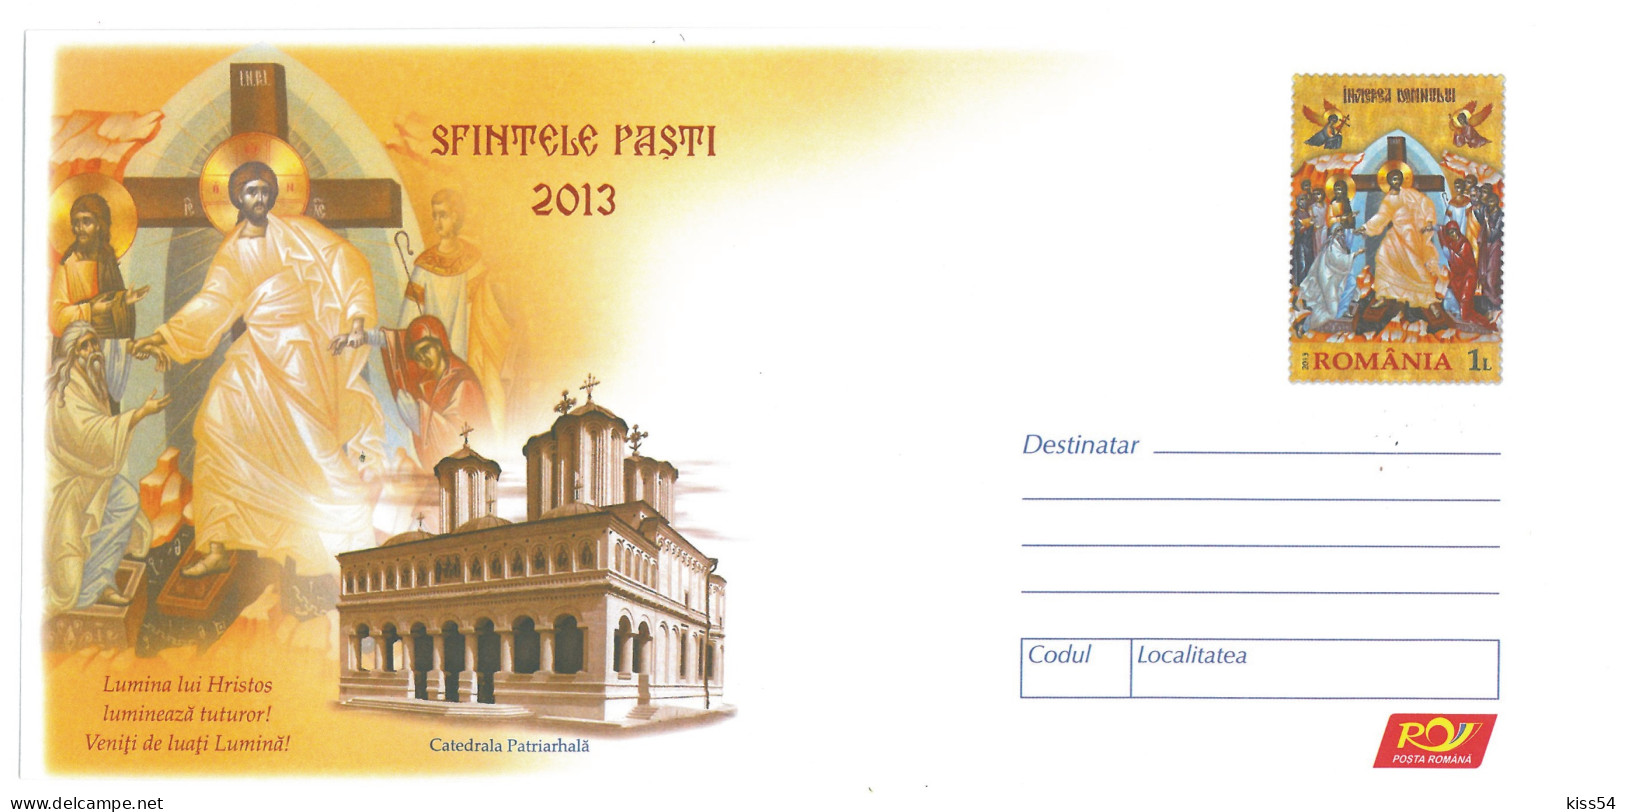 IP 2013 - 2 EASTER, JESUS, Patriarchal Cathedral, Romania - Stationery - Unused - 2013 - Ganzsachen